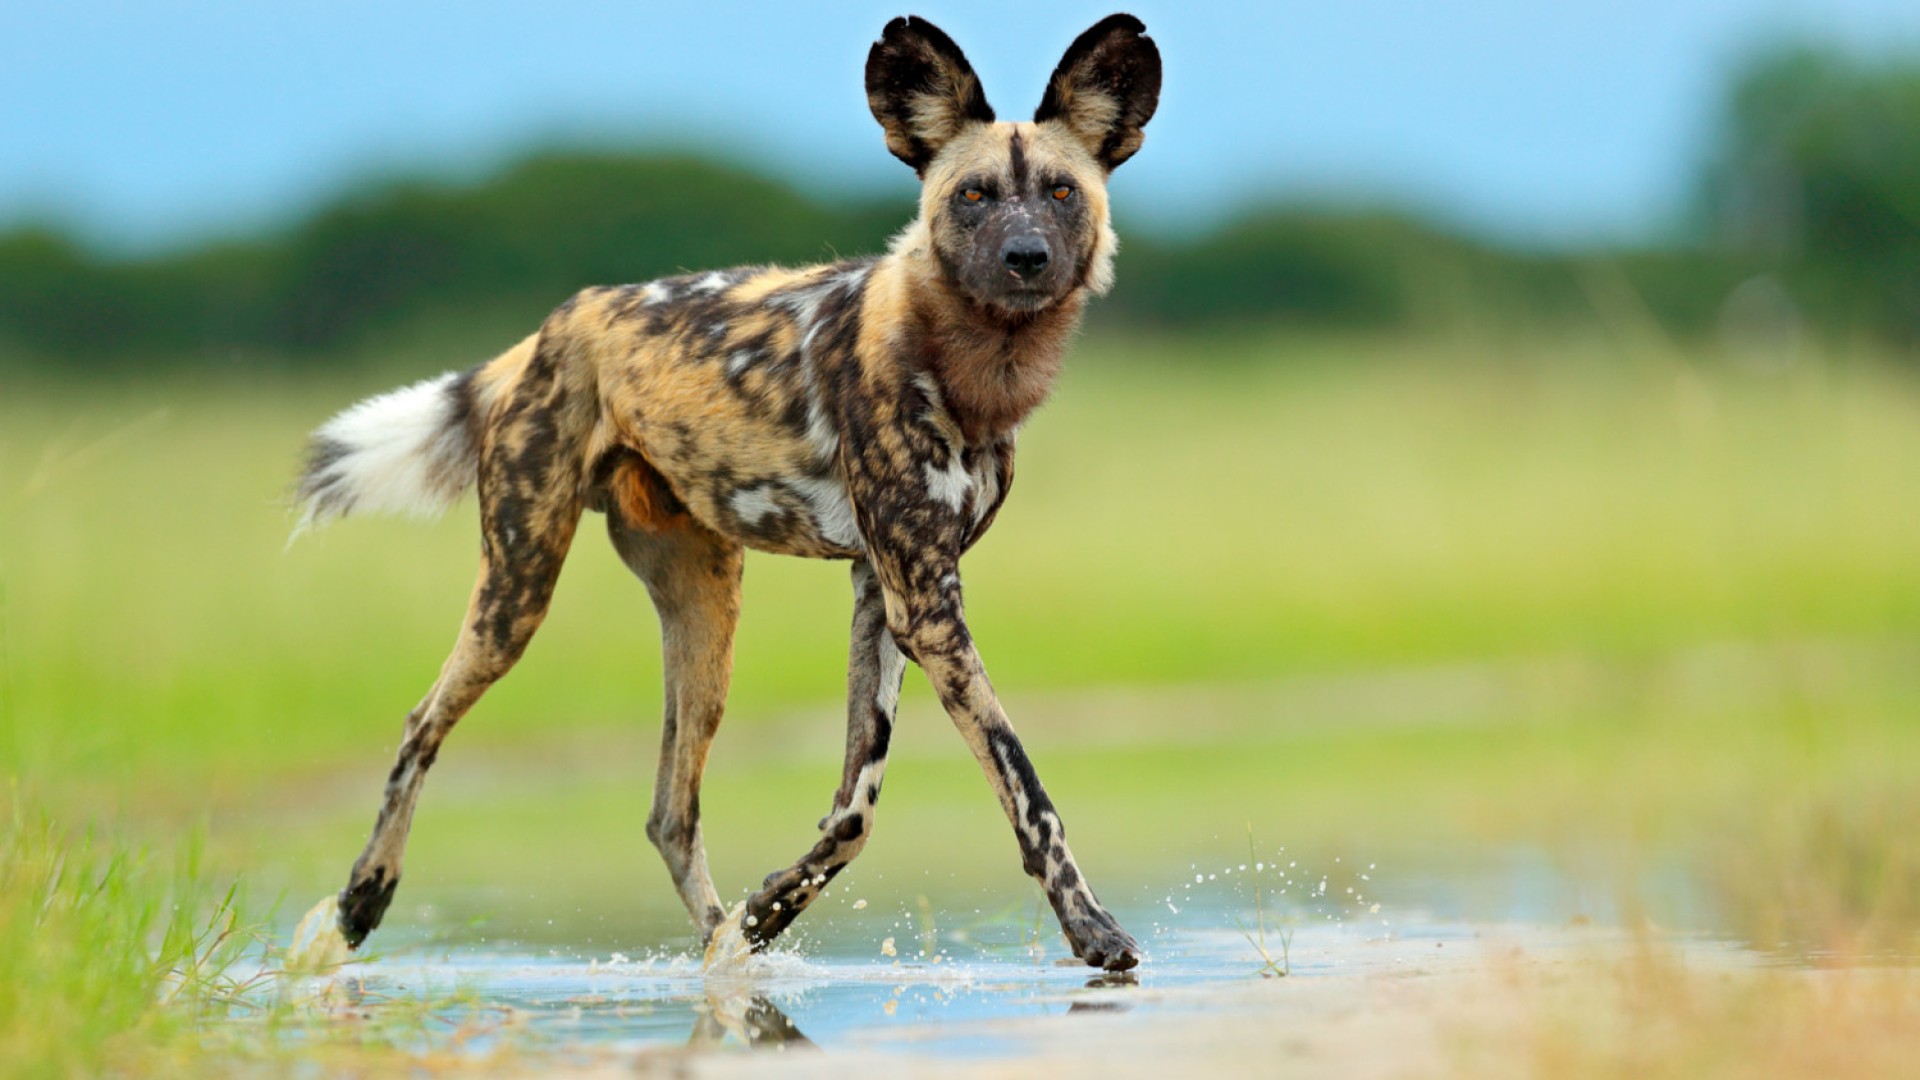 wild dog running in grass making eye contact with the camera